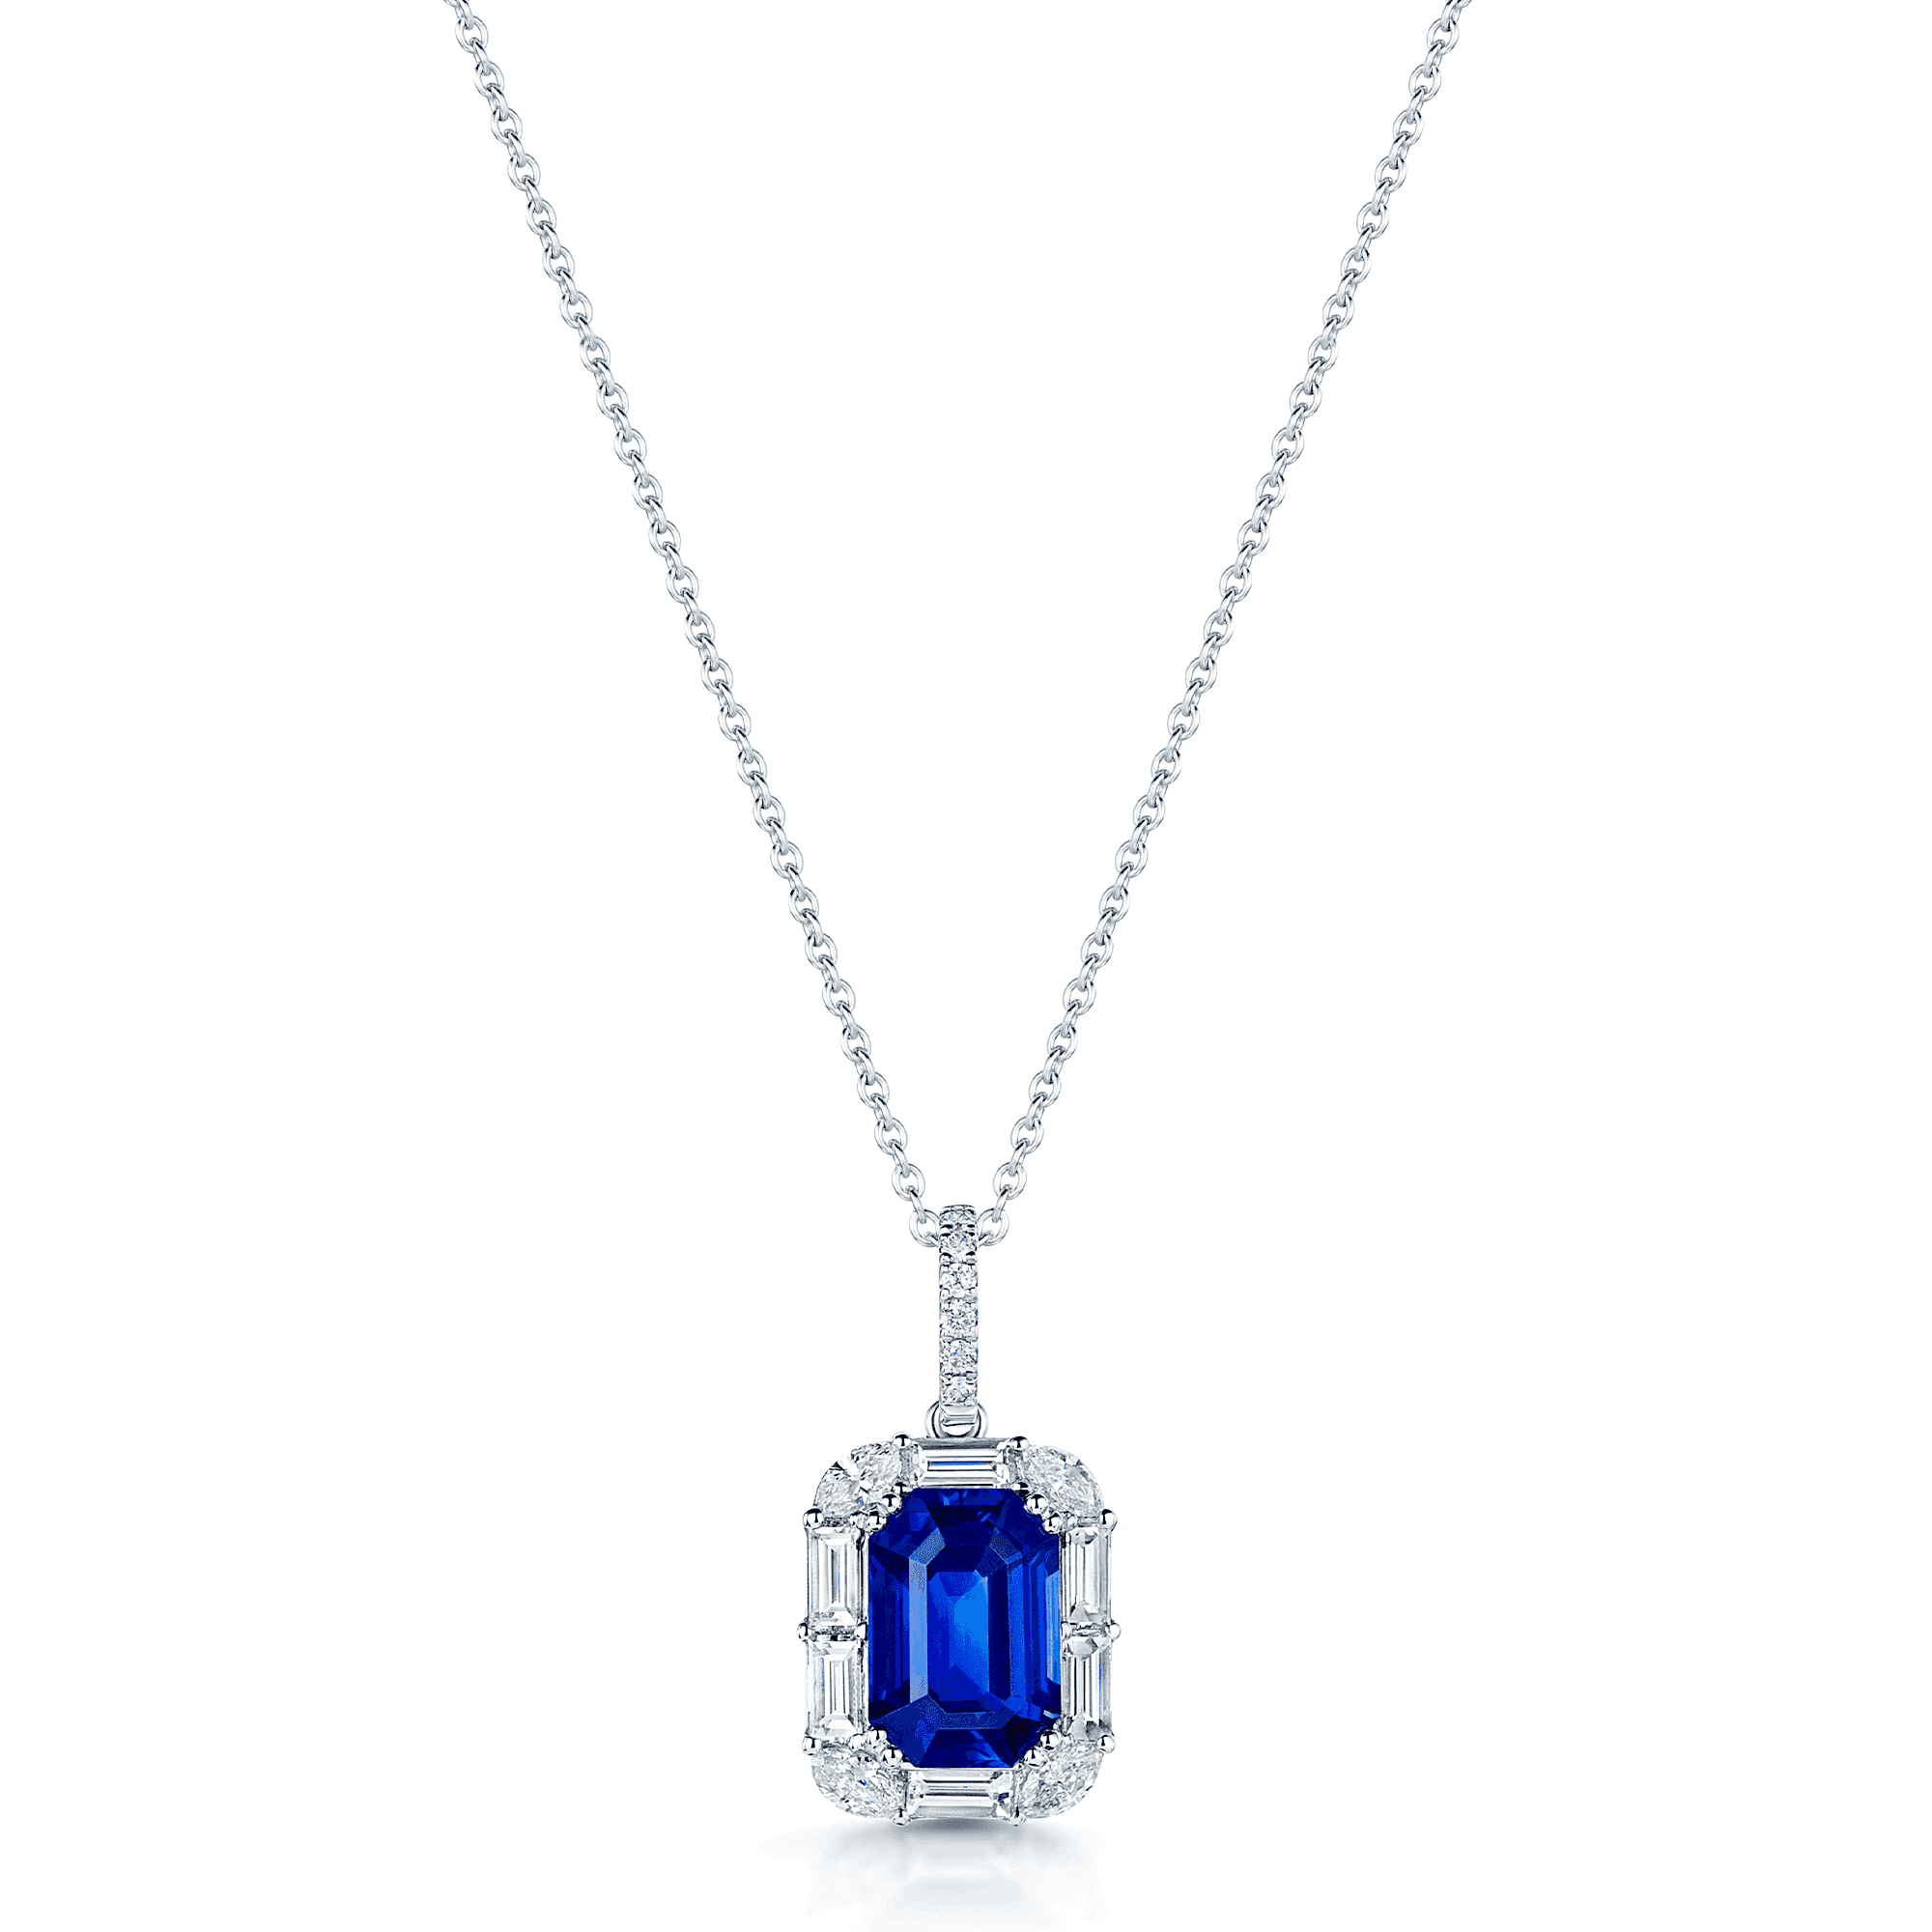 18ct White Gold Emerald Cut Sapphire With Marquise & Baguette Cut Diamond Halo Pendant